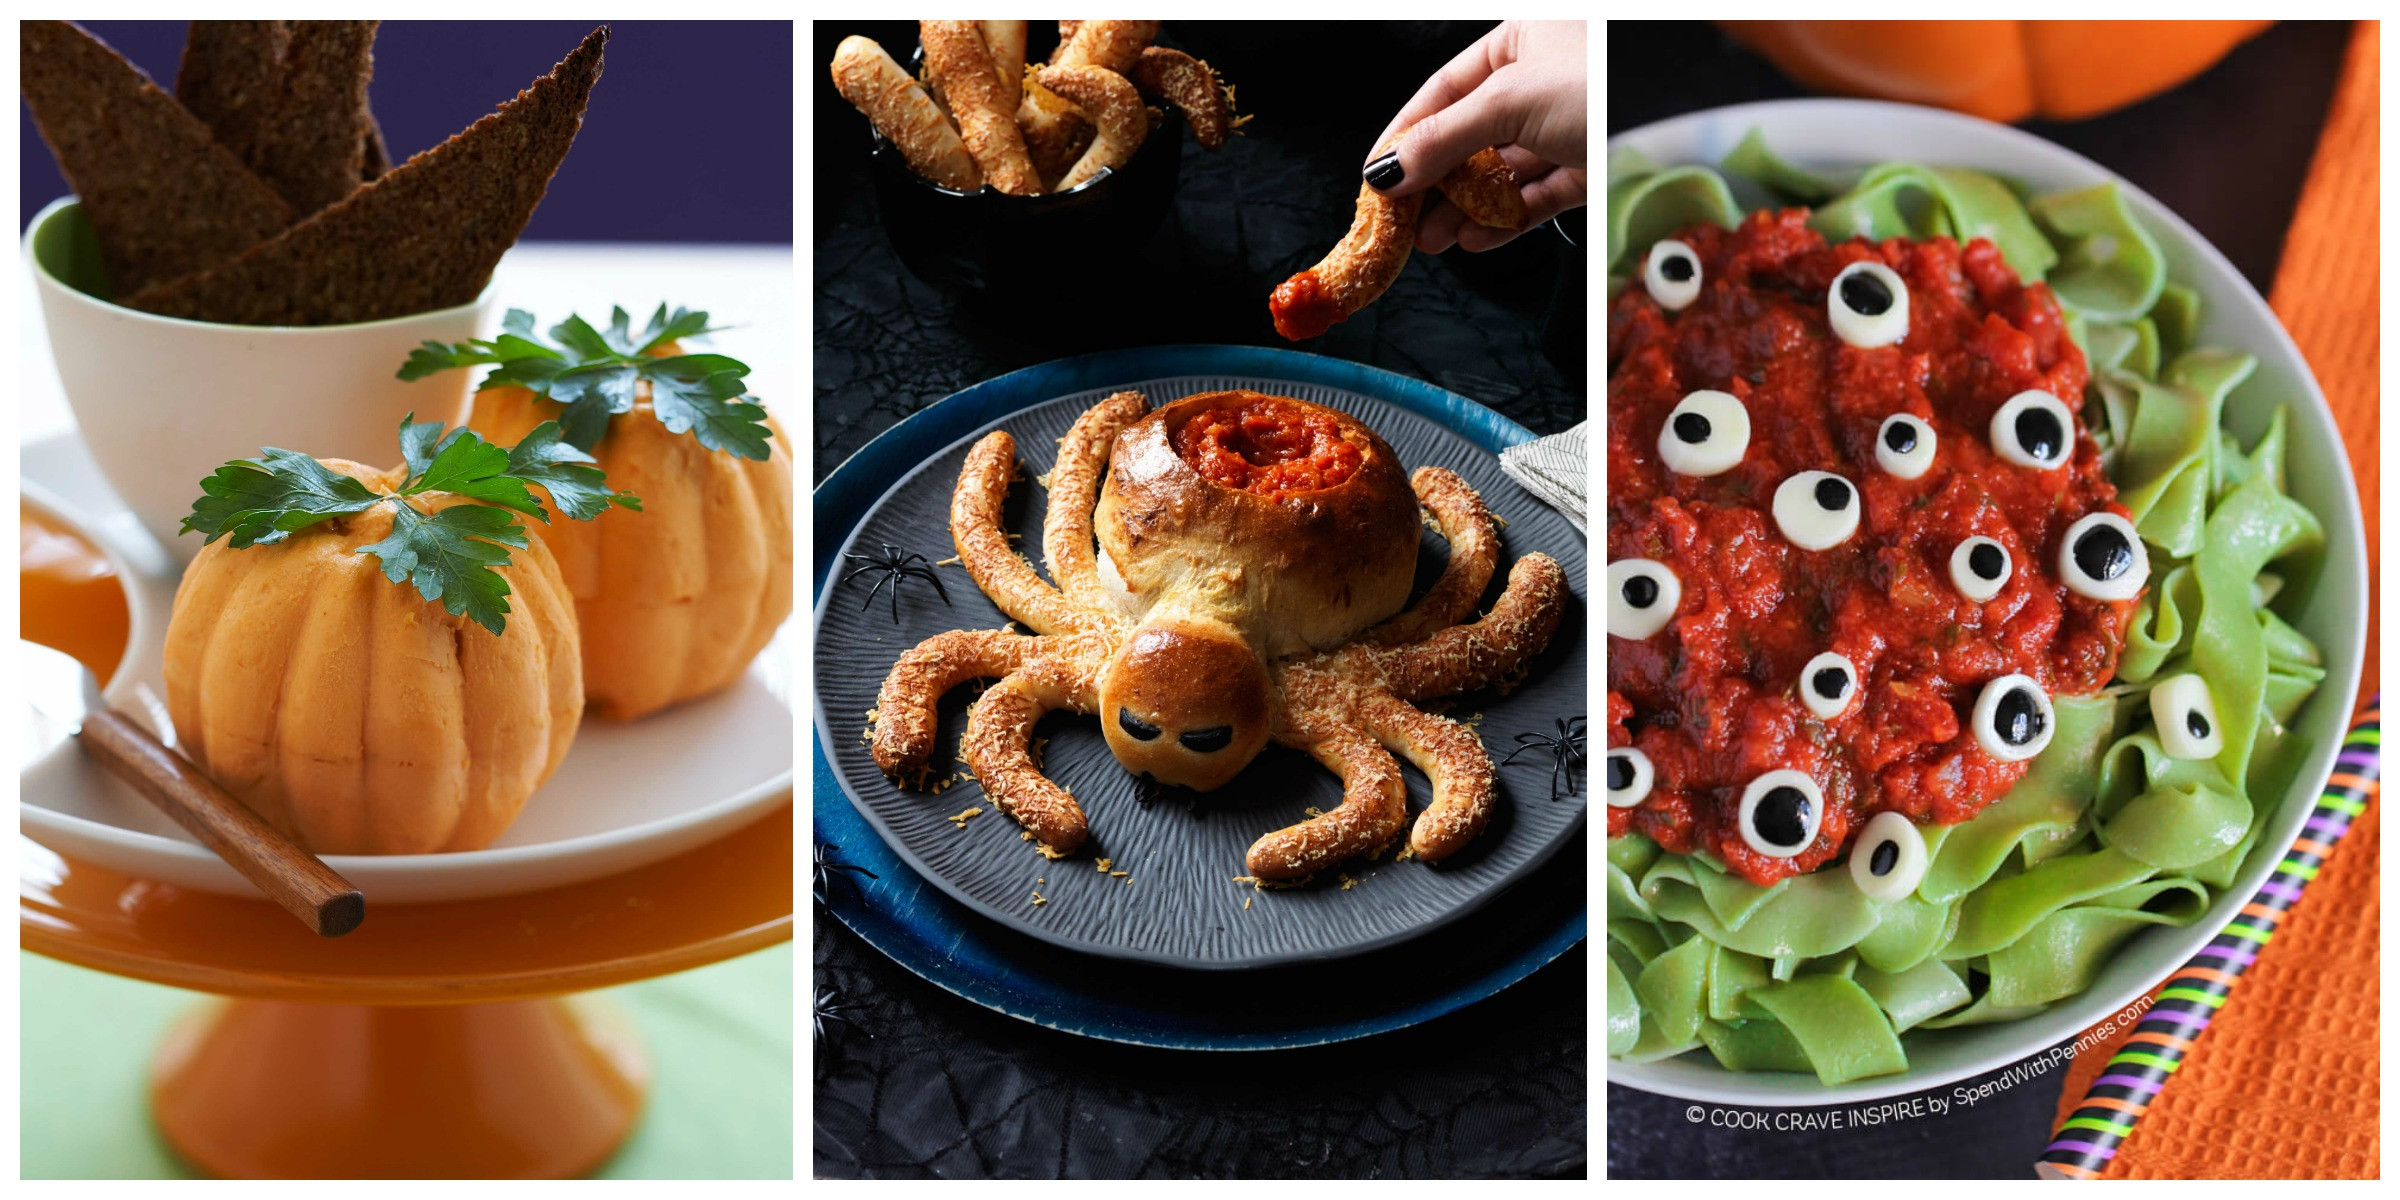 Halloween Dinner Recipes With Pictures
 25 Spooky Halloween Dinner Ideas Best Recipes for